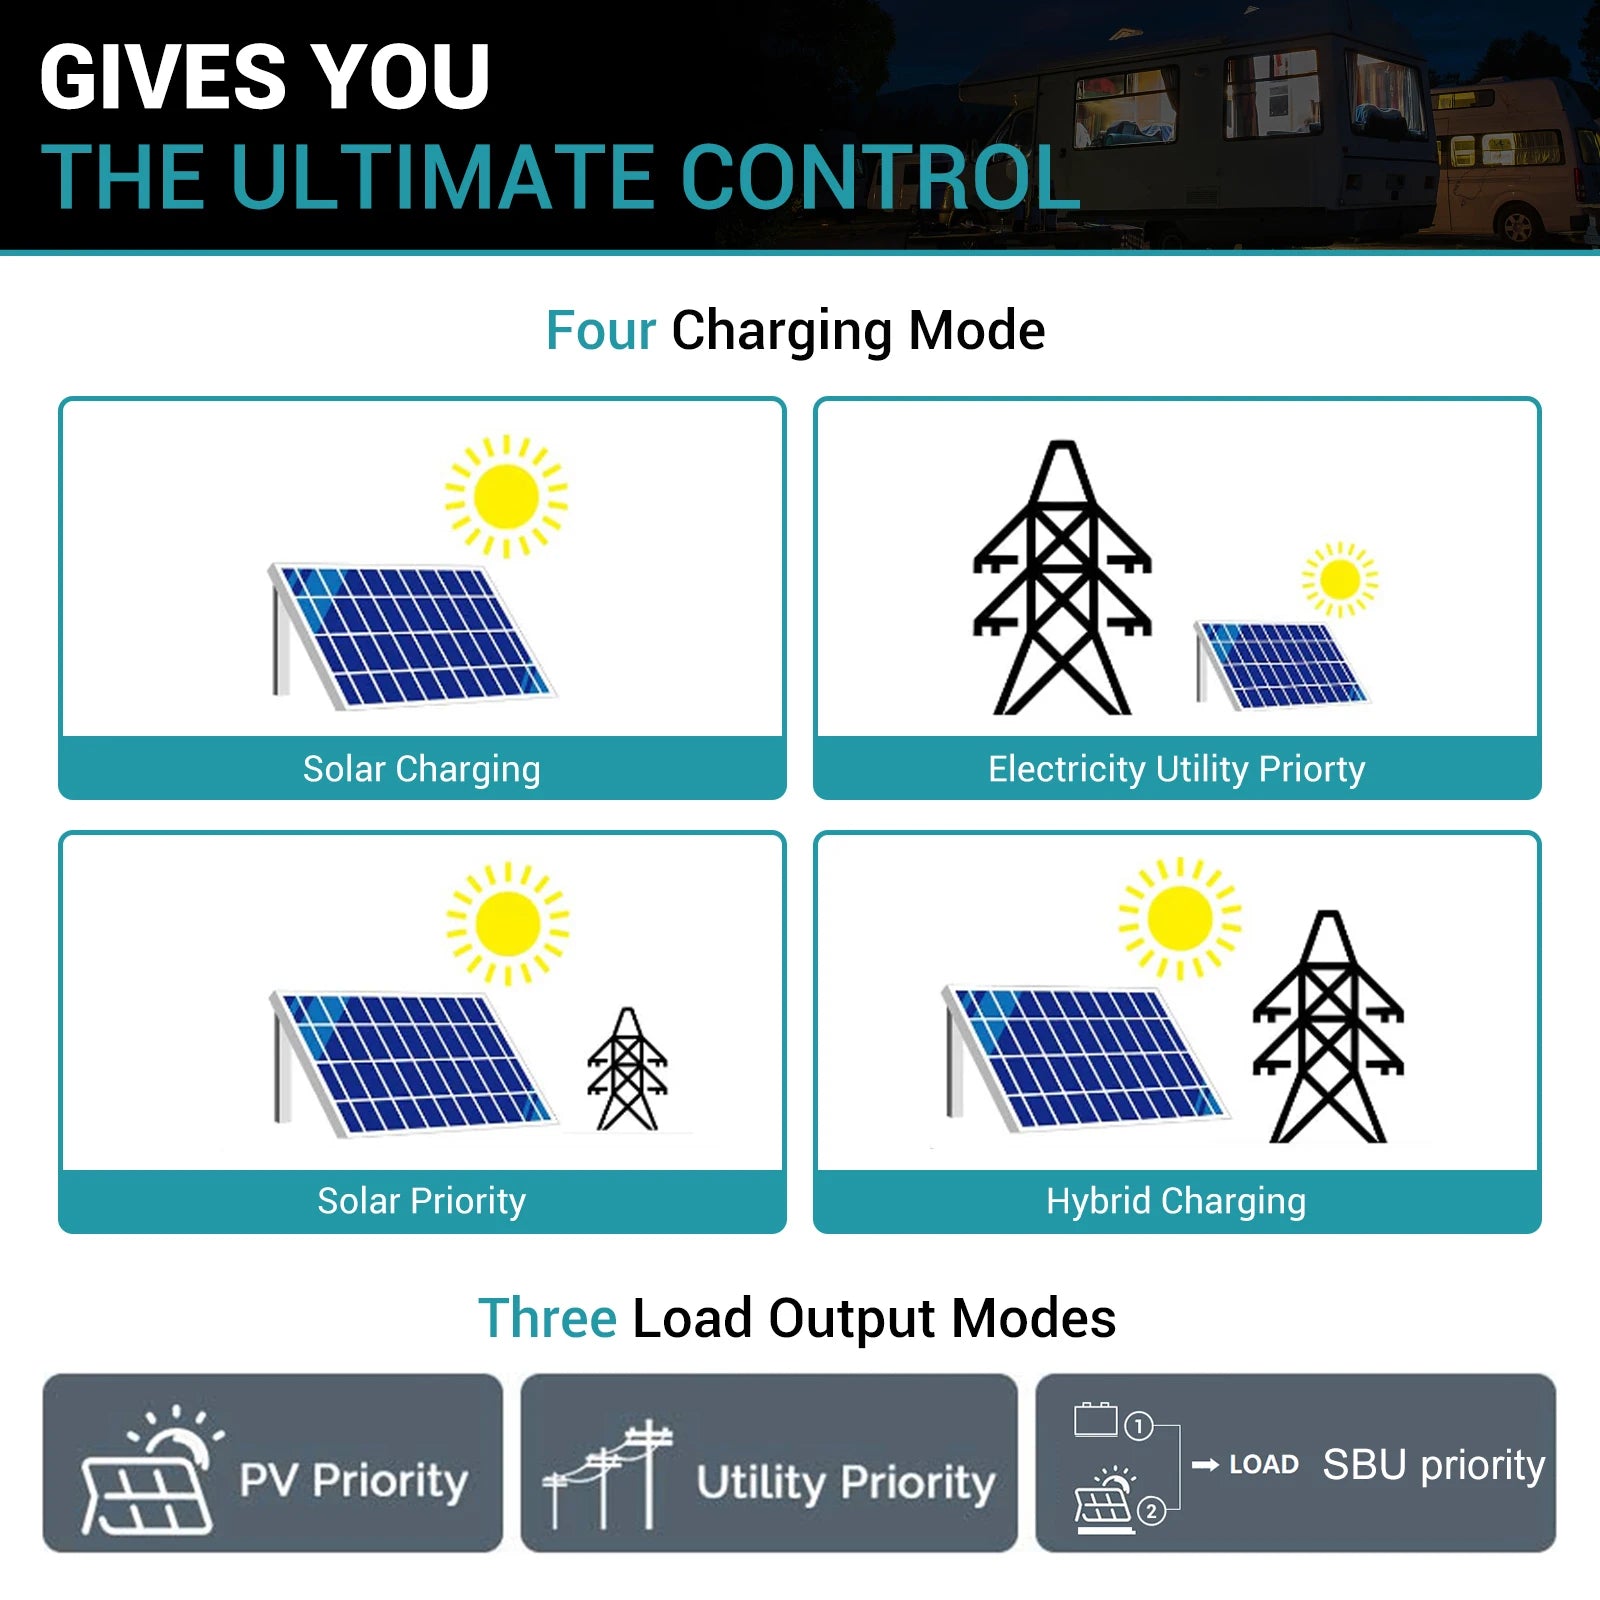 Charging modes: solar, electric, utility, and hybrid; load output modes: PV, utility, and load priority.